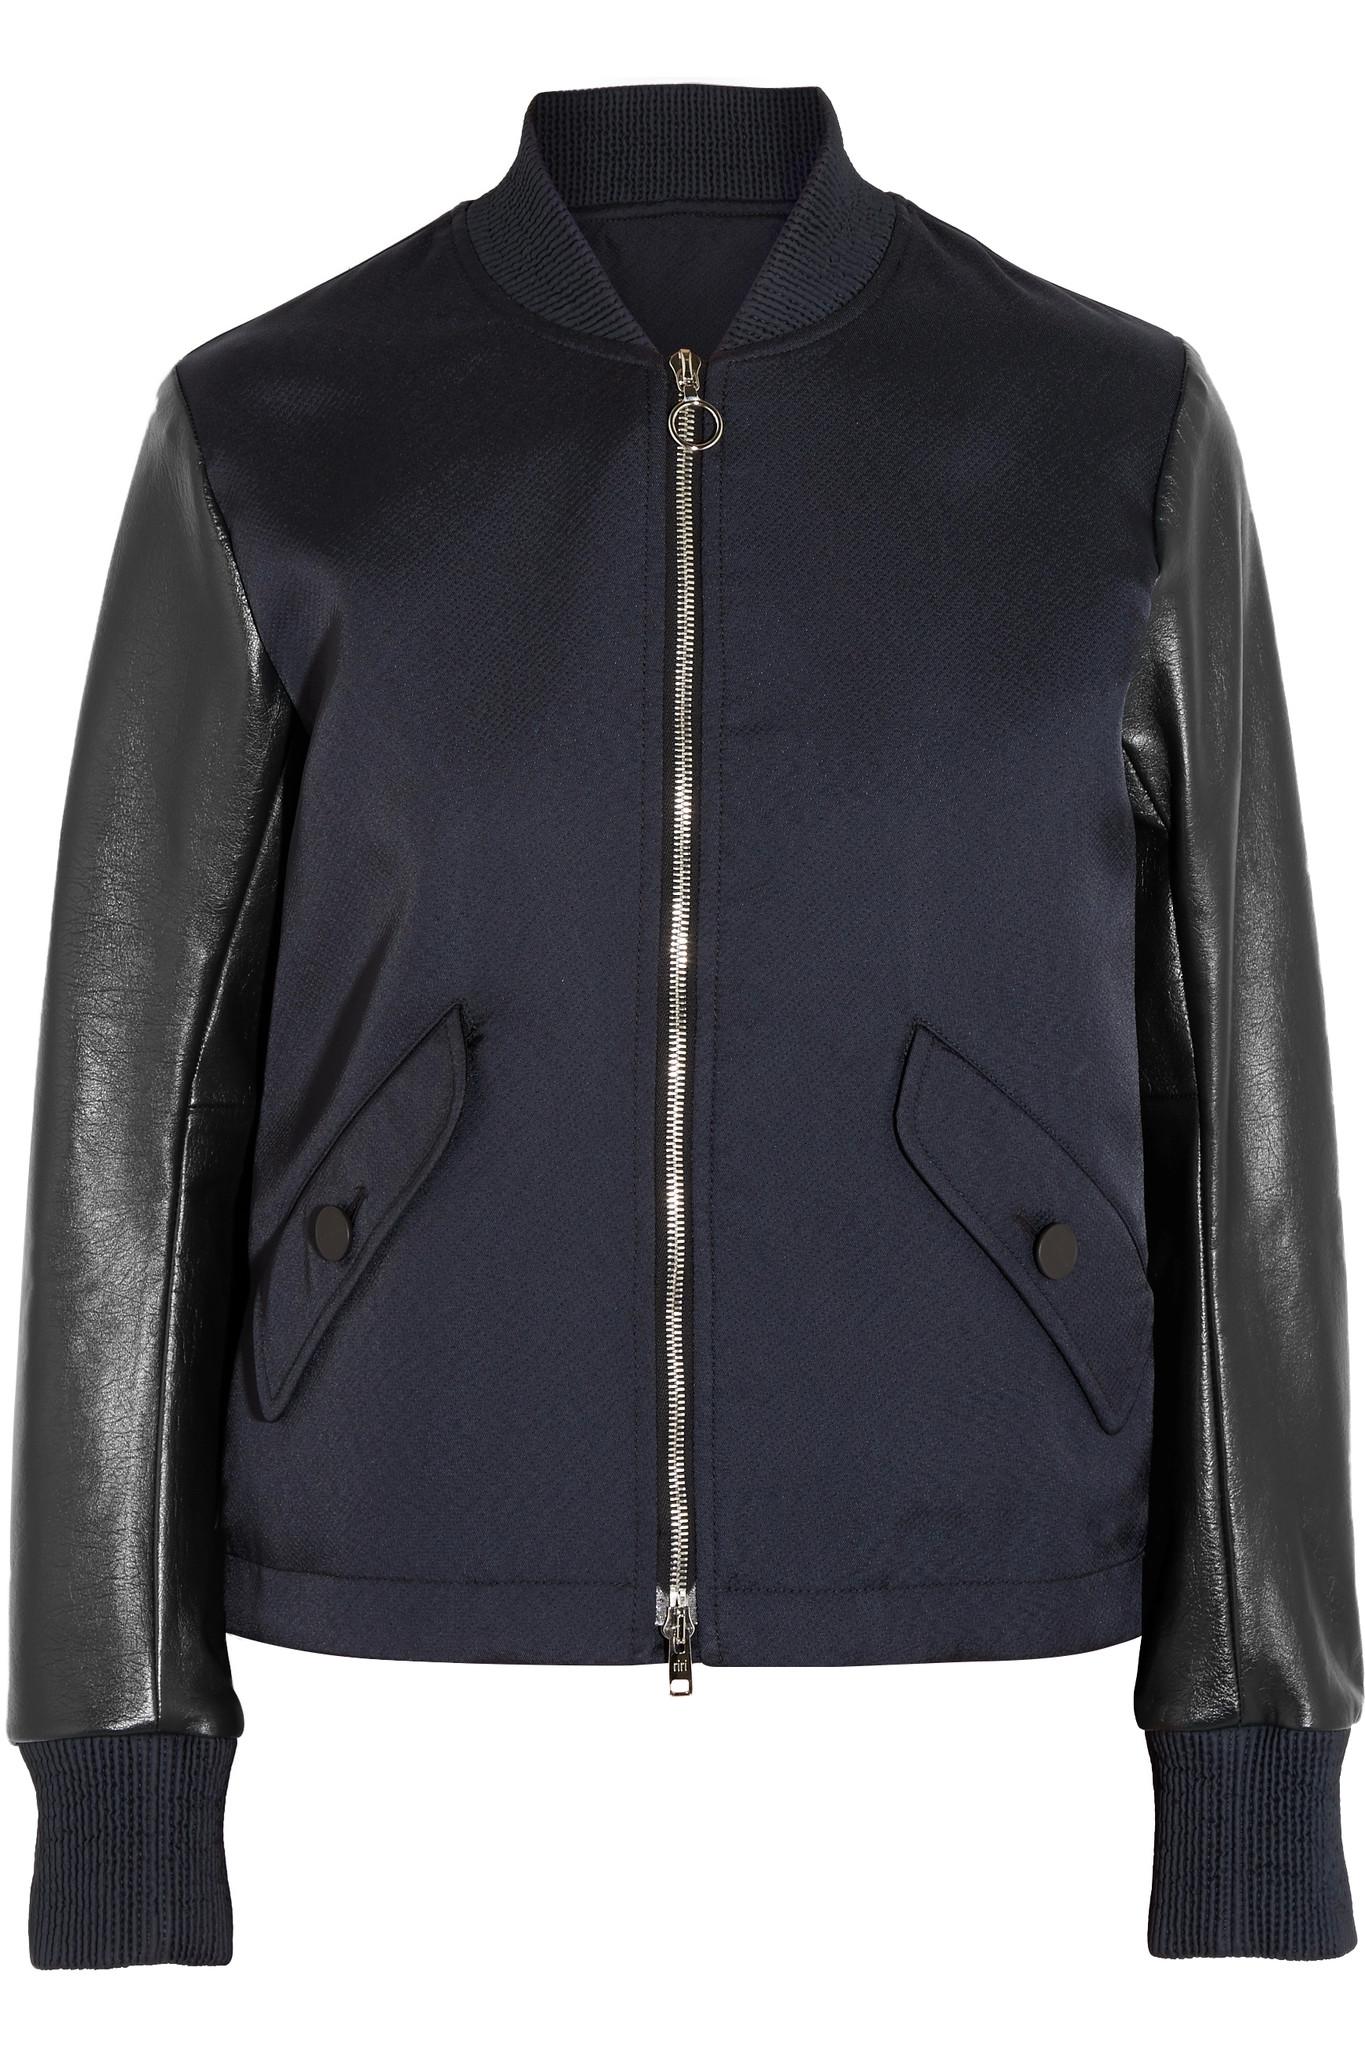 Lyst - Tim Coppens Lace-up Leather And Twill Bomber Jacket in Black